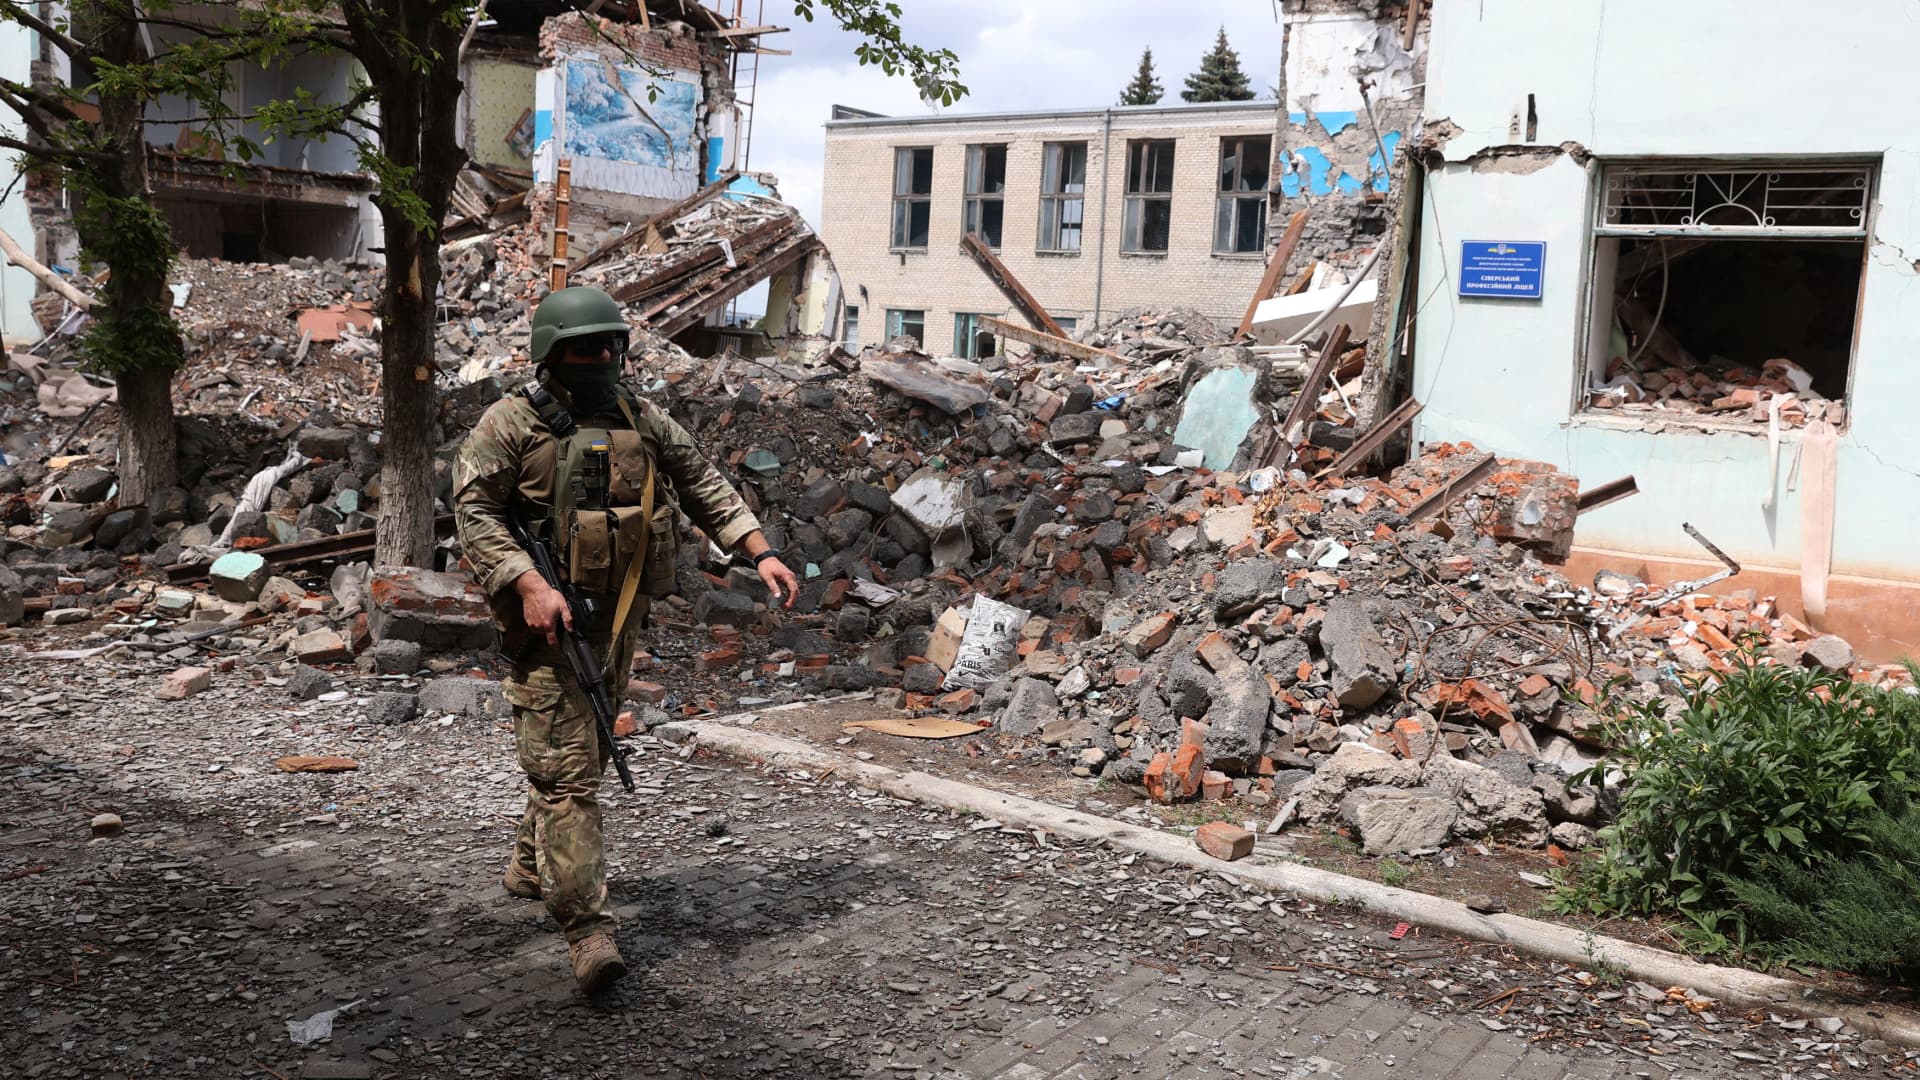 A Ukrainian serviceman passes by destroyed buildings in the Ukrainian town of Siversk, Donetsk region on July 22, 2022 amid the Russian invasion of Ukraine. 